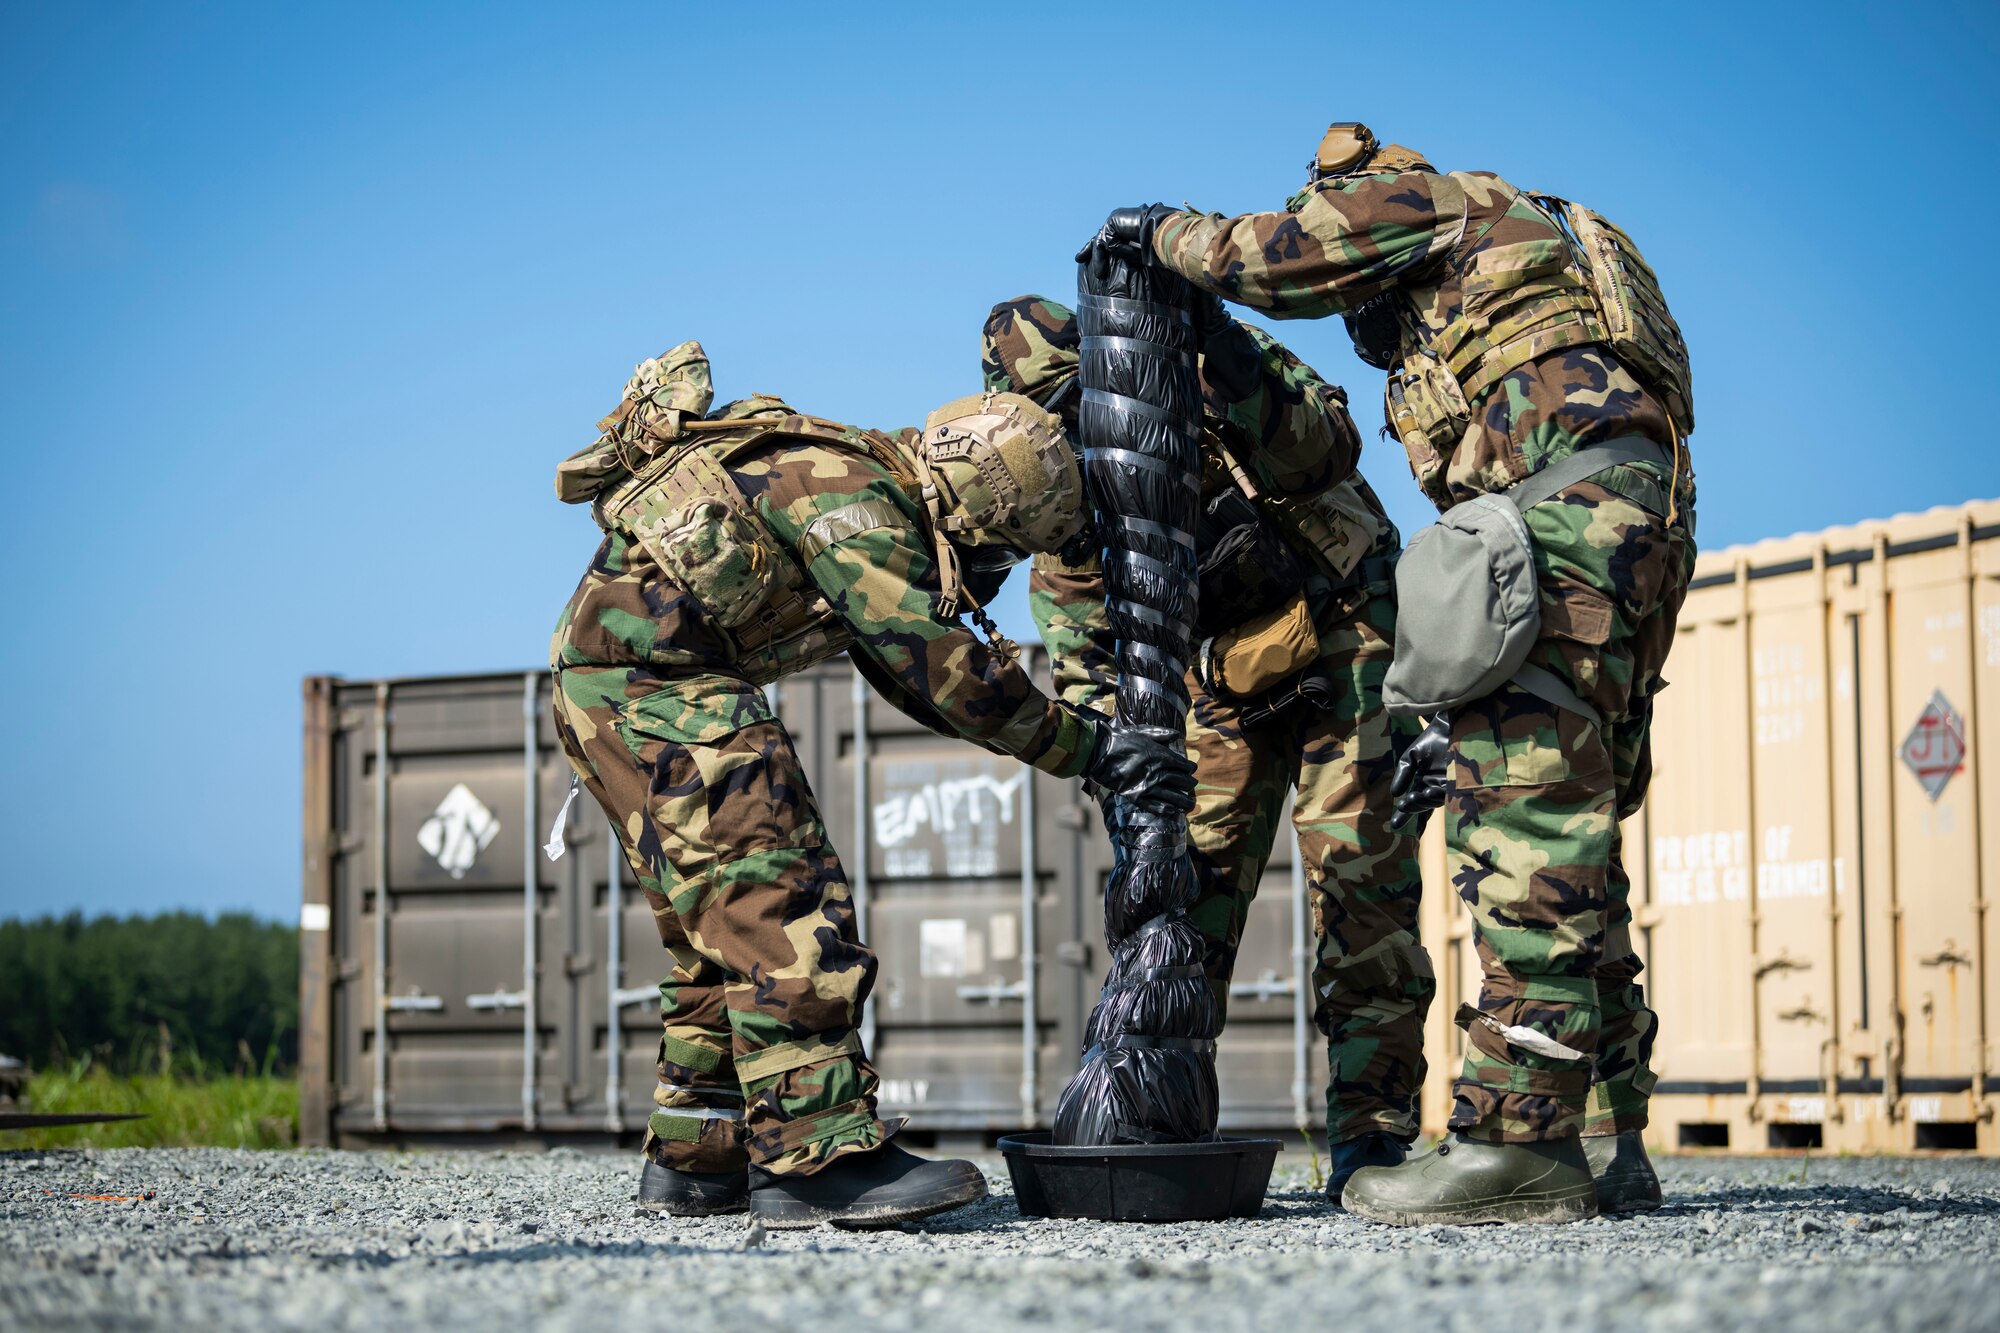 U.S. military members in chemical gear cover a chemical weapon.